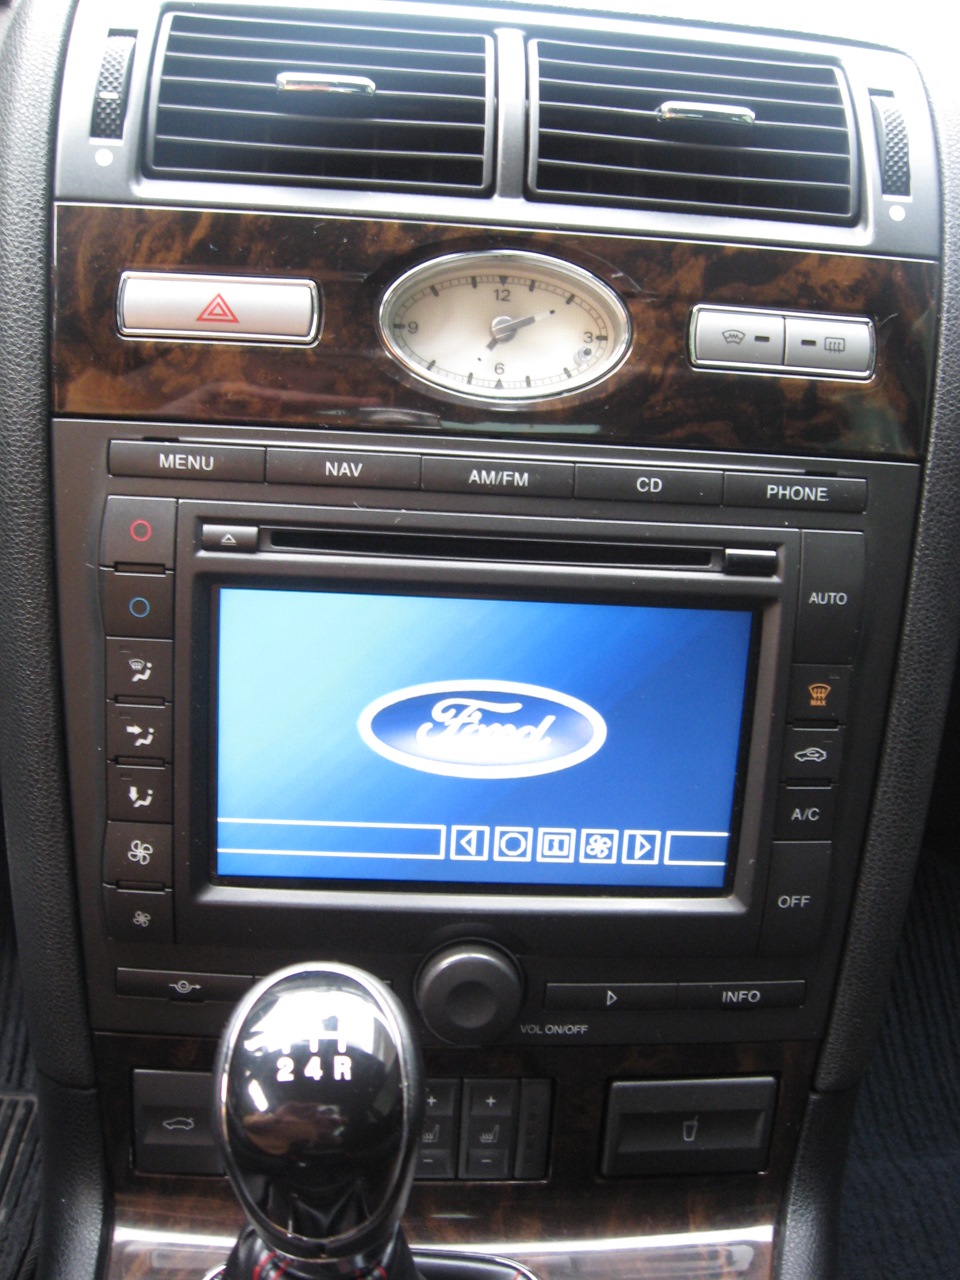 ford mondeo dvd